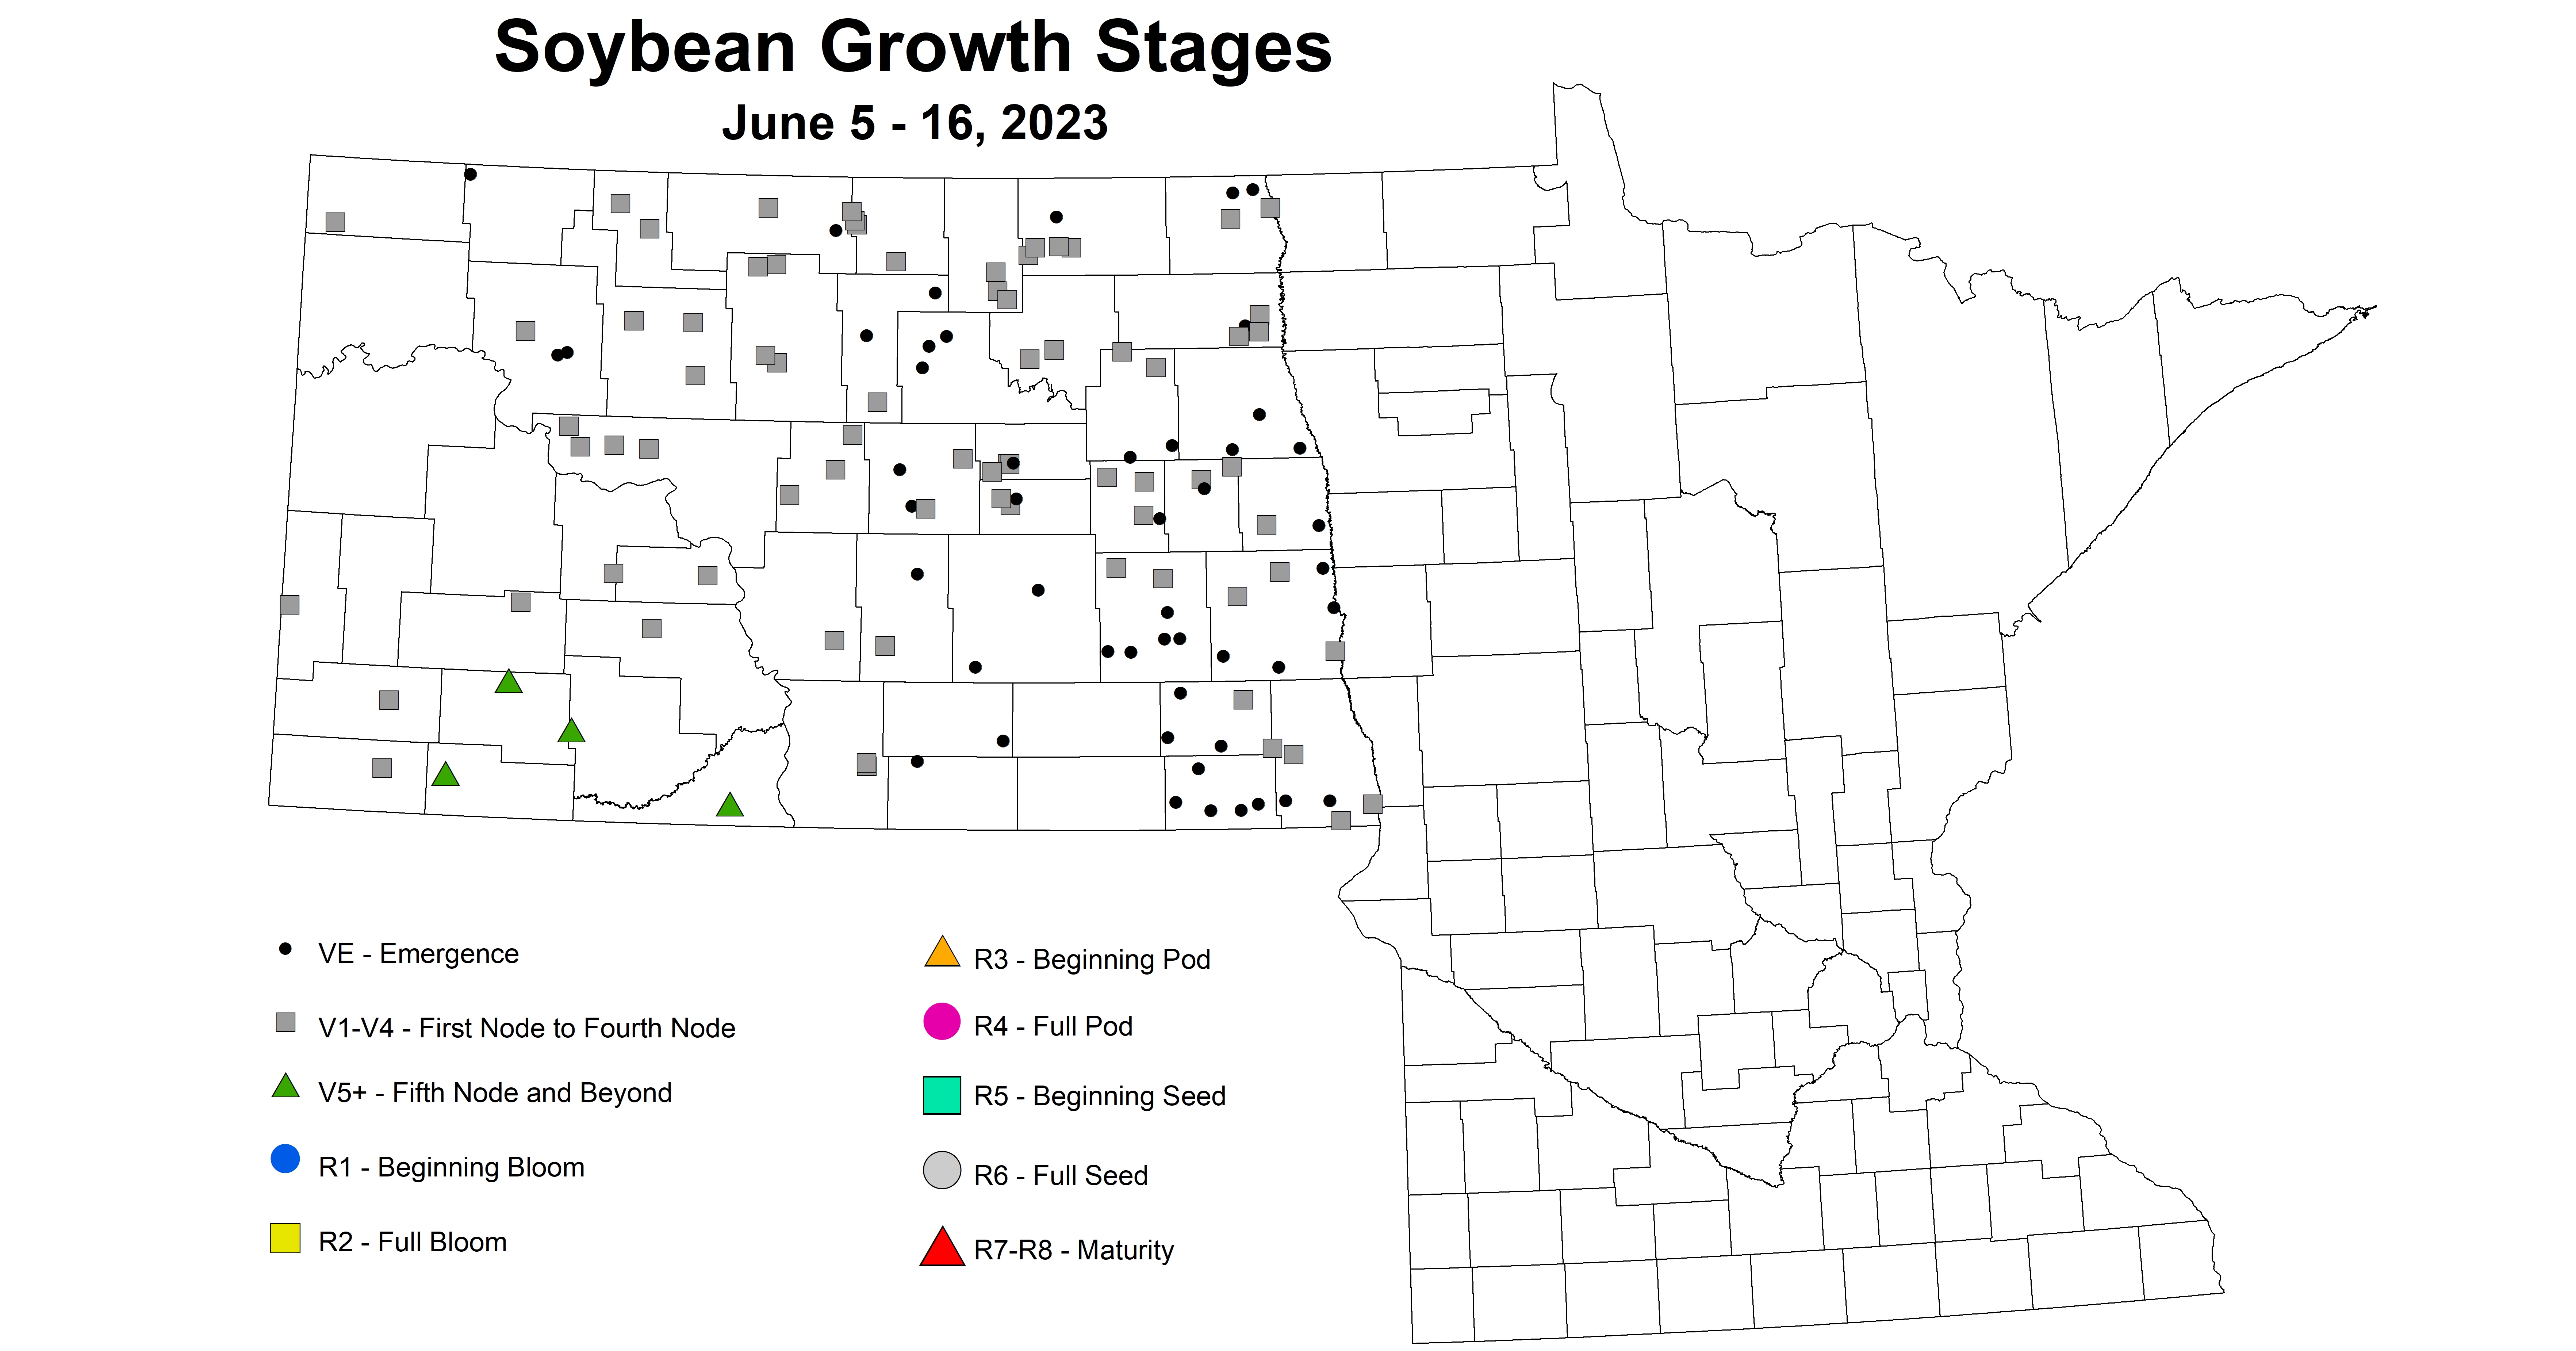 soybean growth stages June 5-16 2023